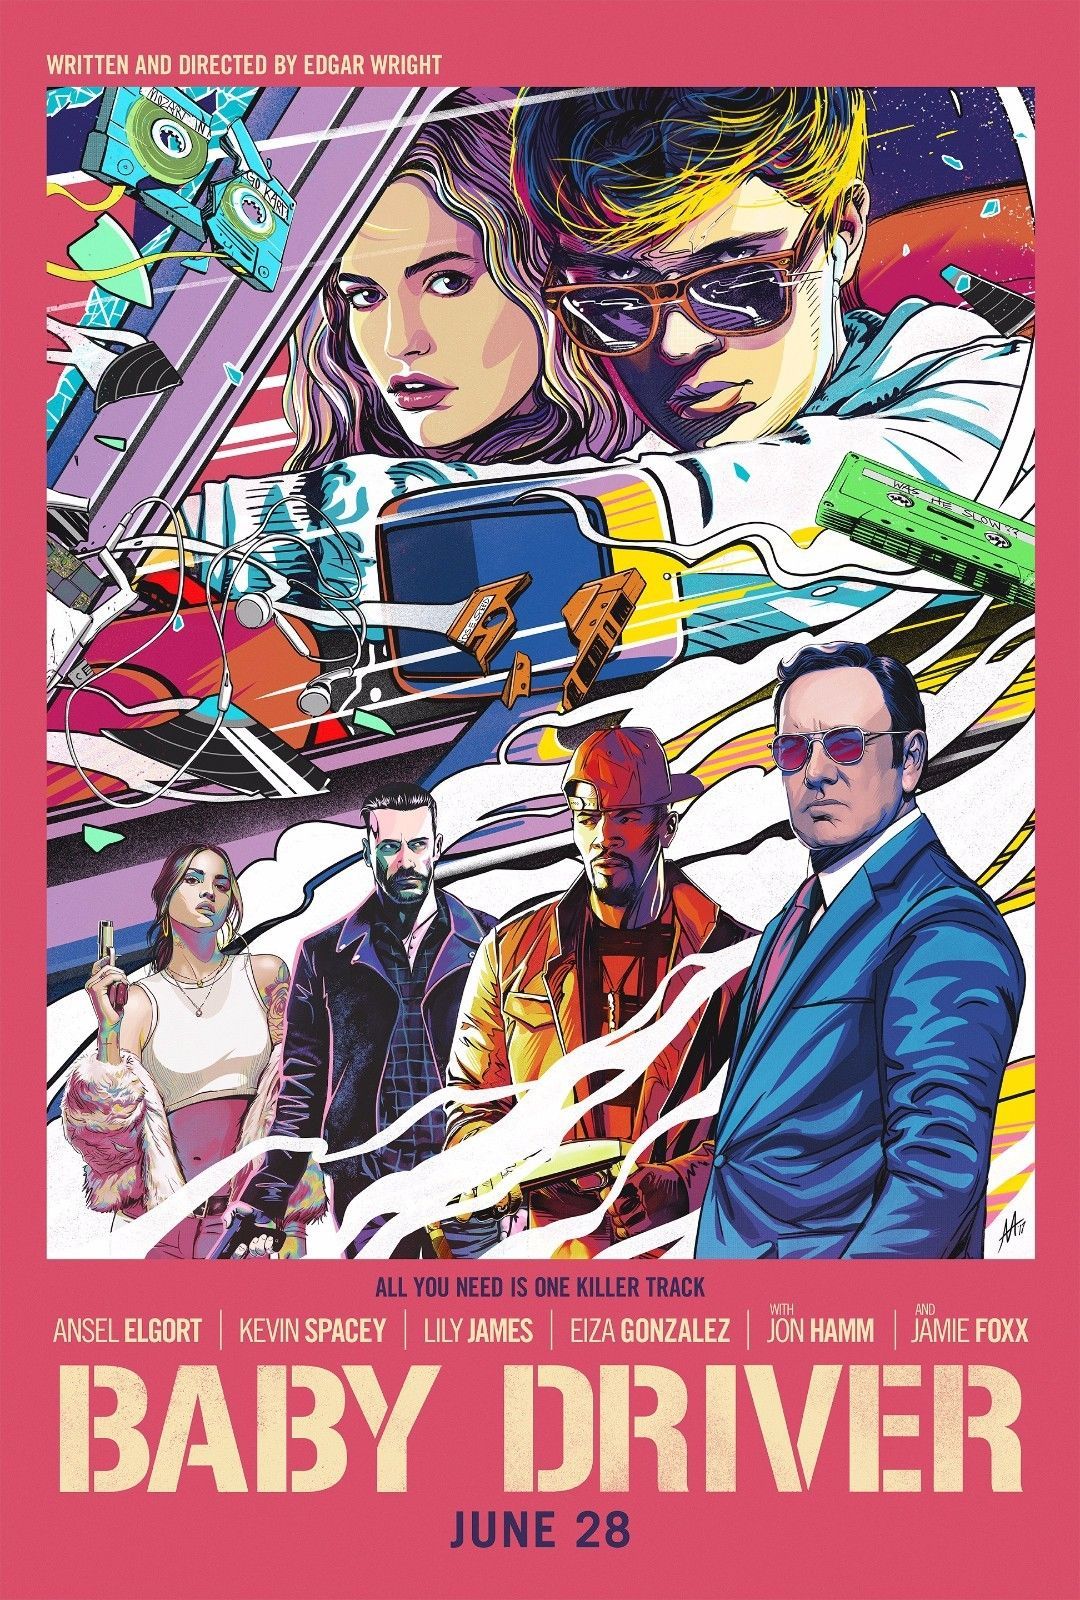 Baby Driver Movie Poster 2017 Film Kevin Spacey Edgar Wright 14x21 24x36 32x48